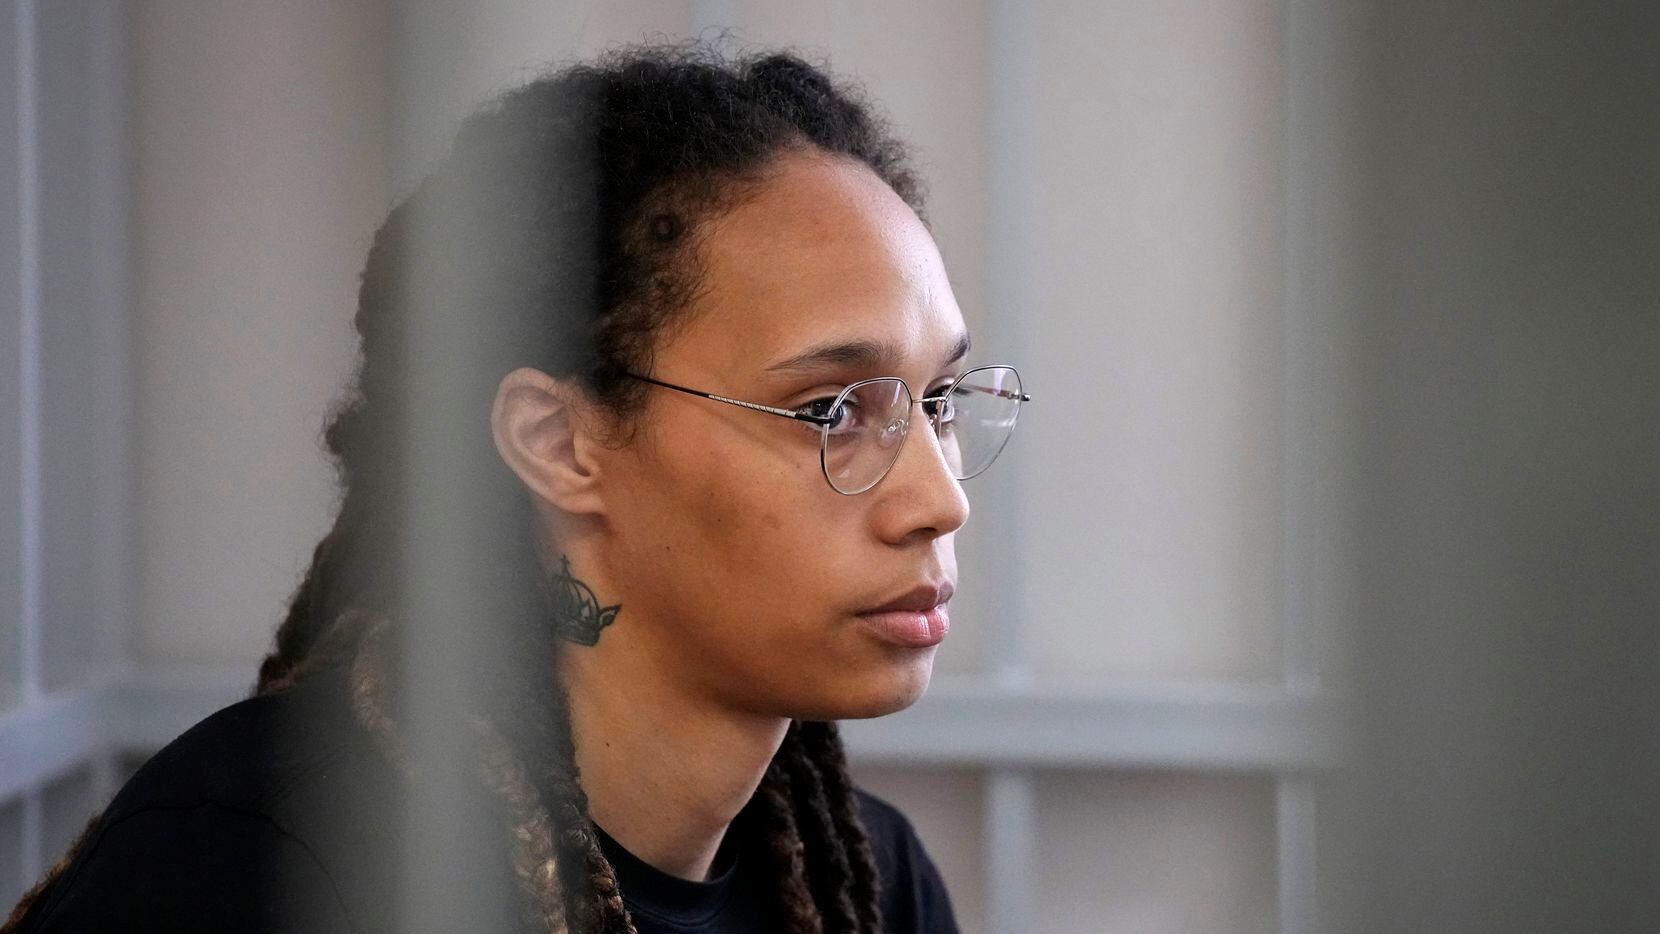 WNBA star and two-time Olympic gold medalist Brittney Griner sits in a cage at a court room...